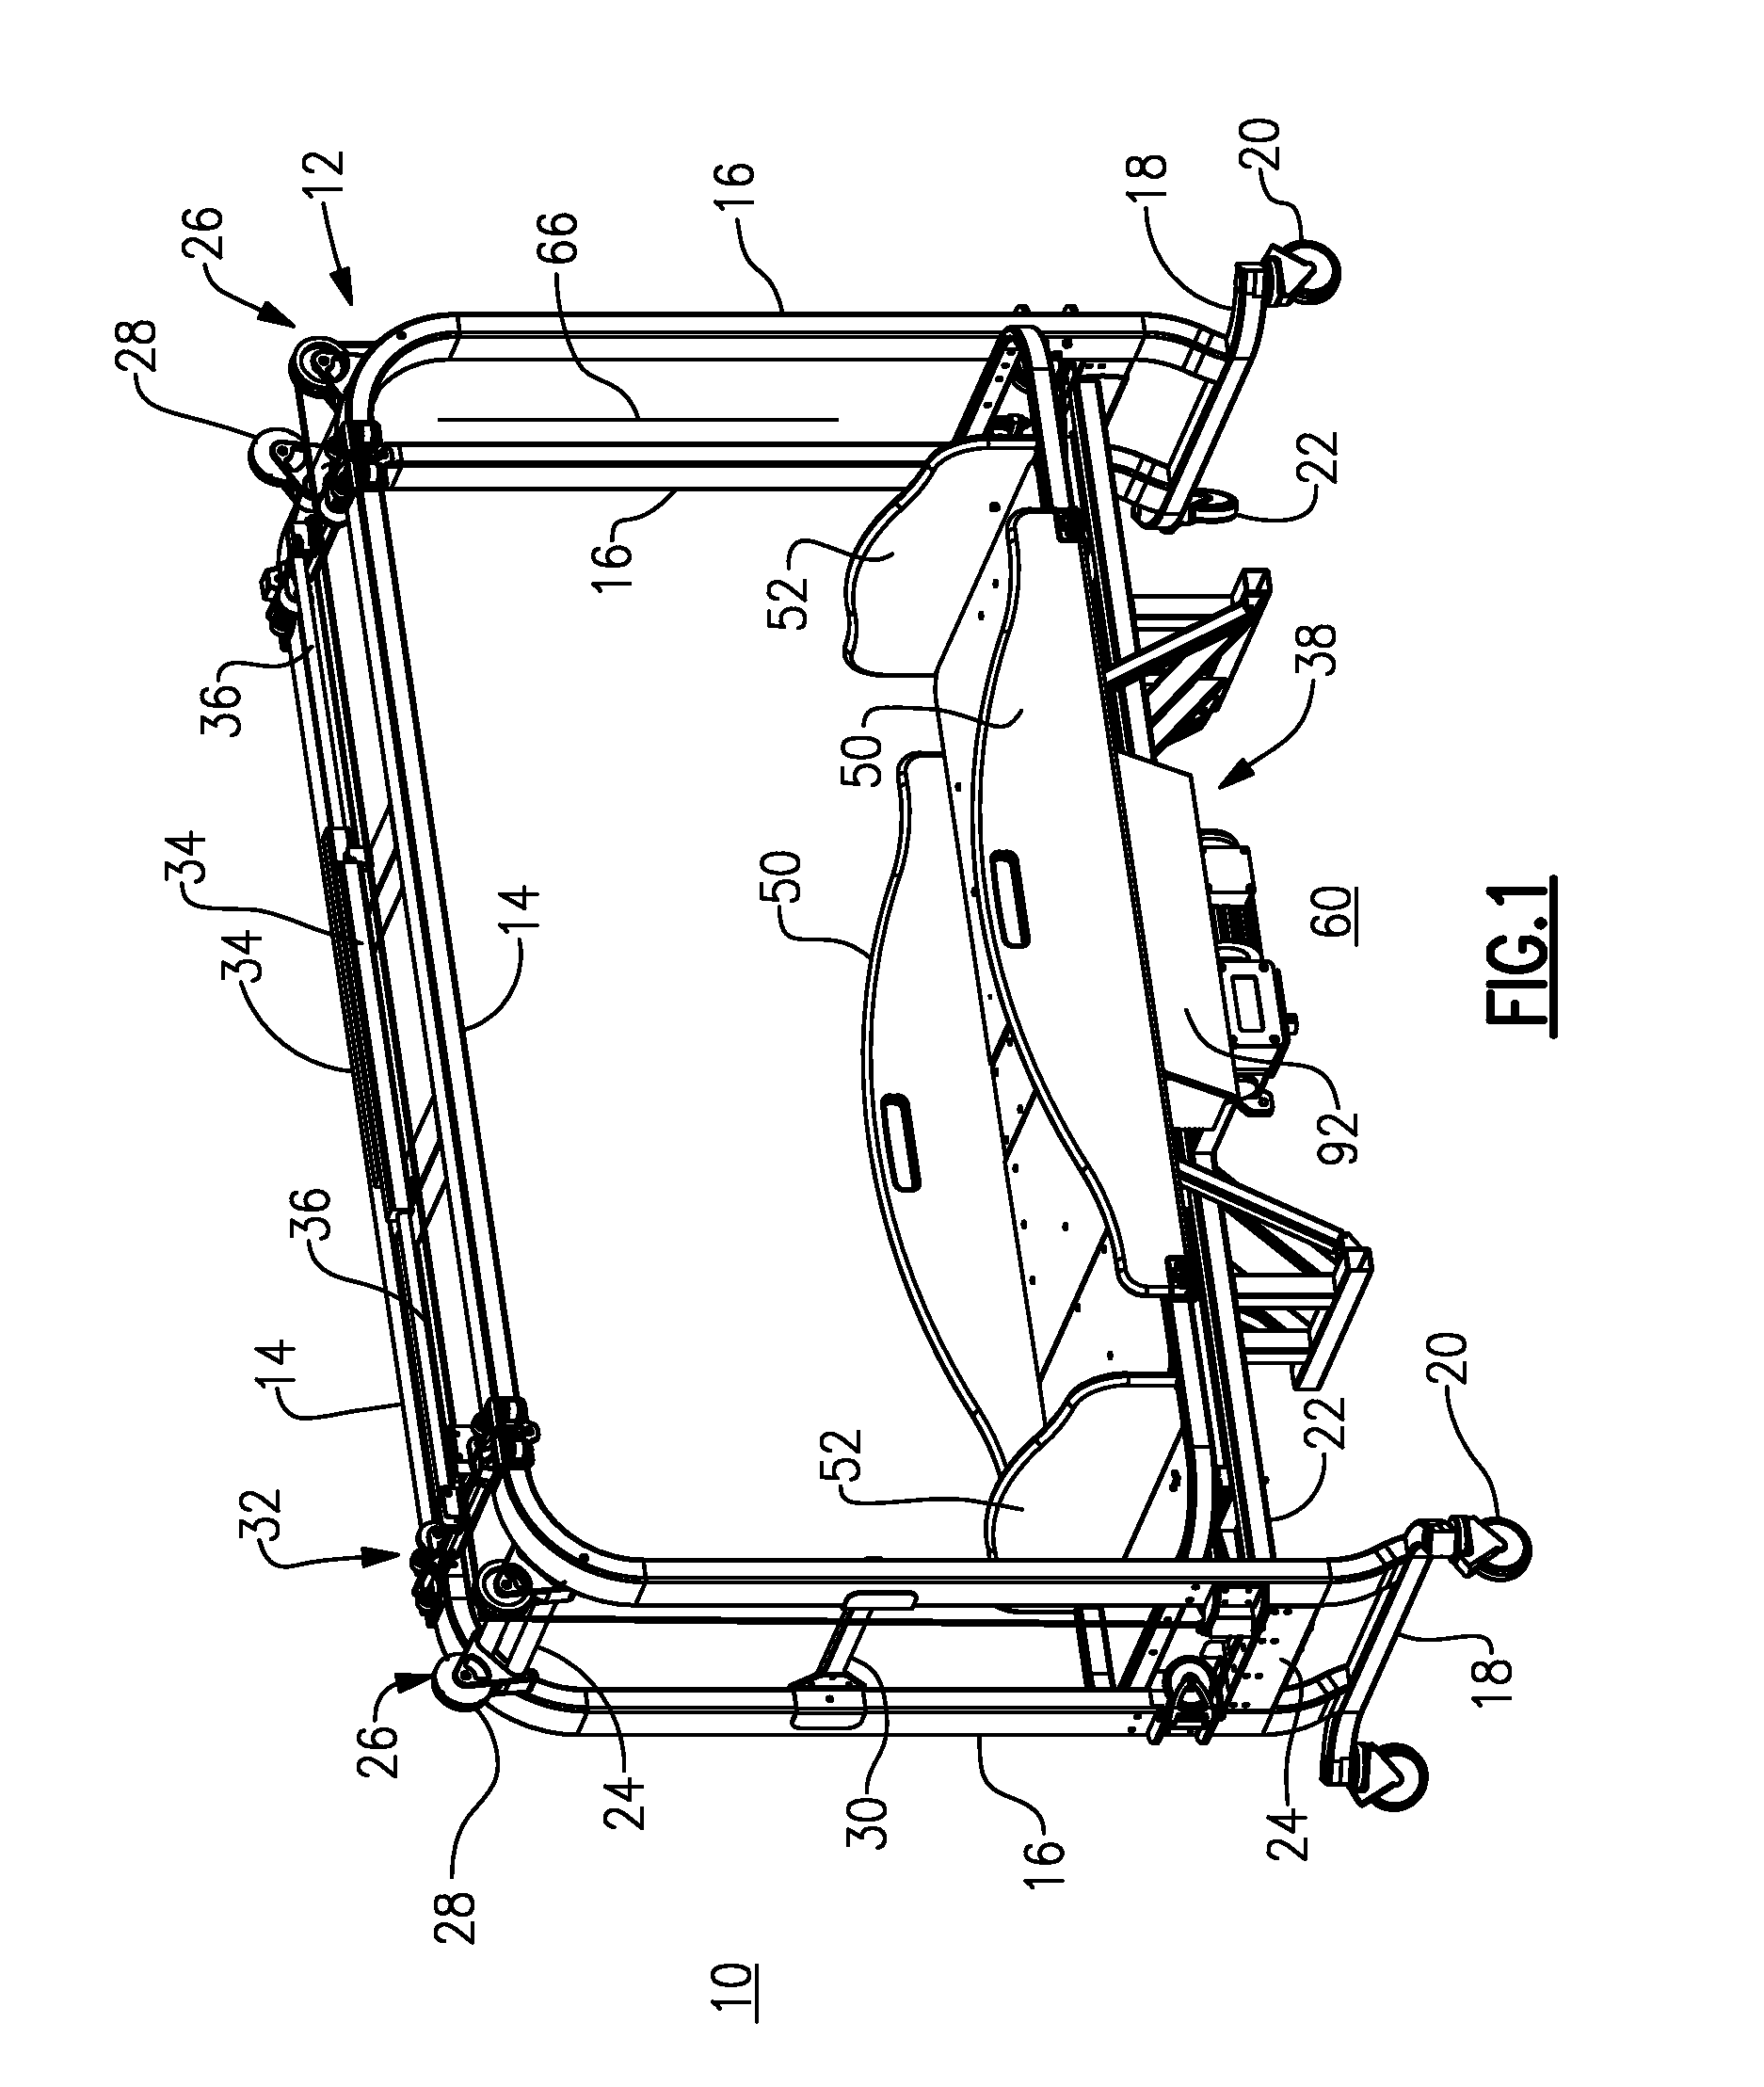 Passive Mobility Exercise and Range-of-Motion Bed Apparatus